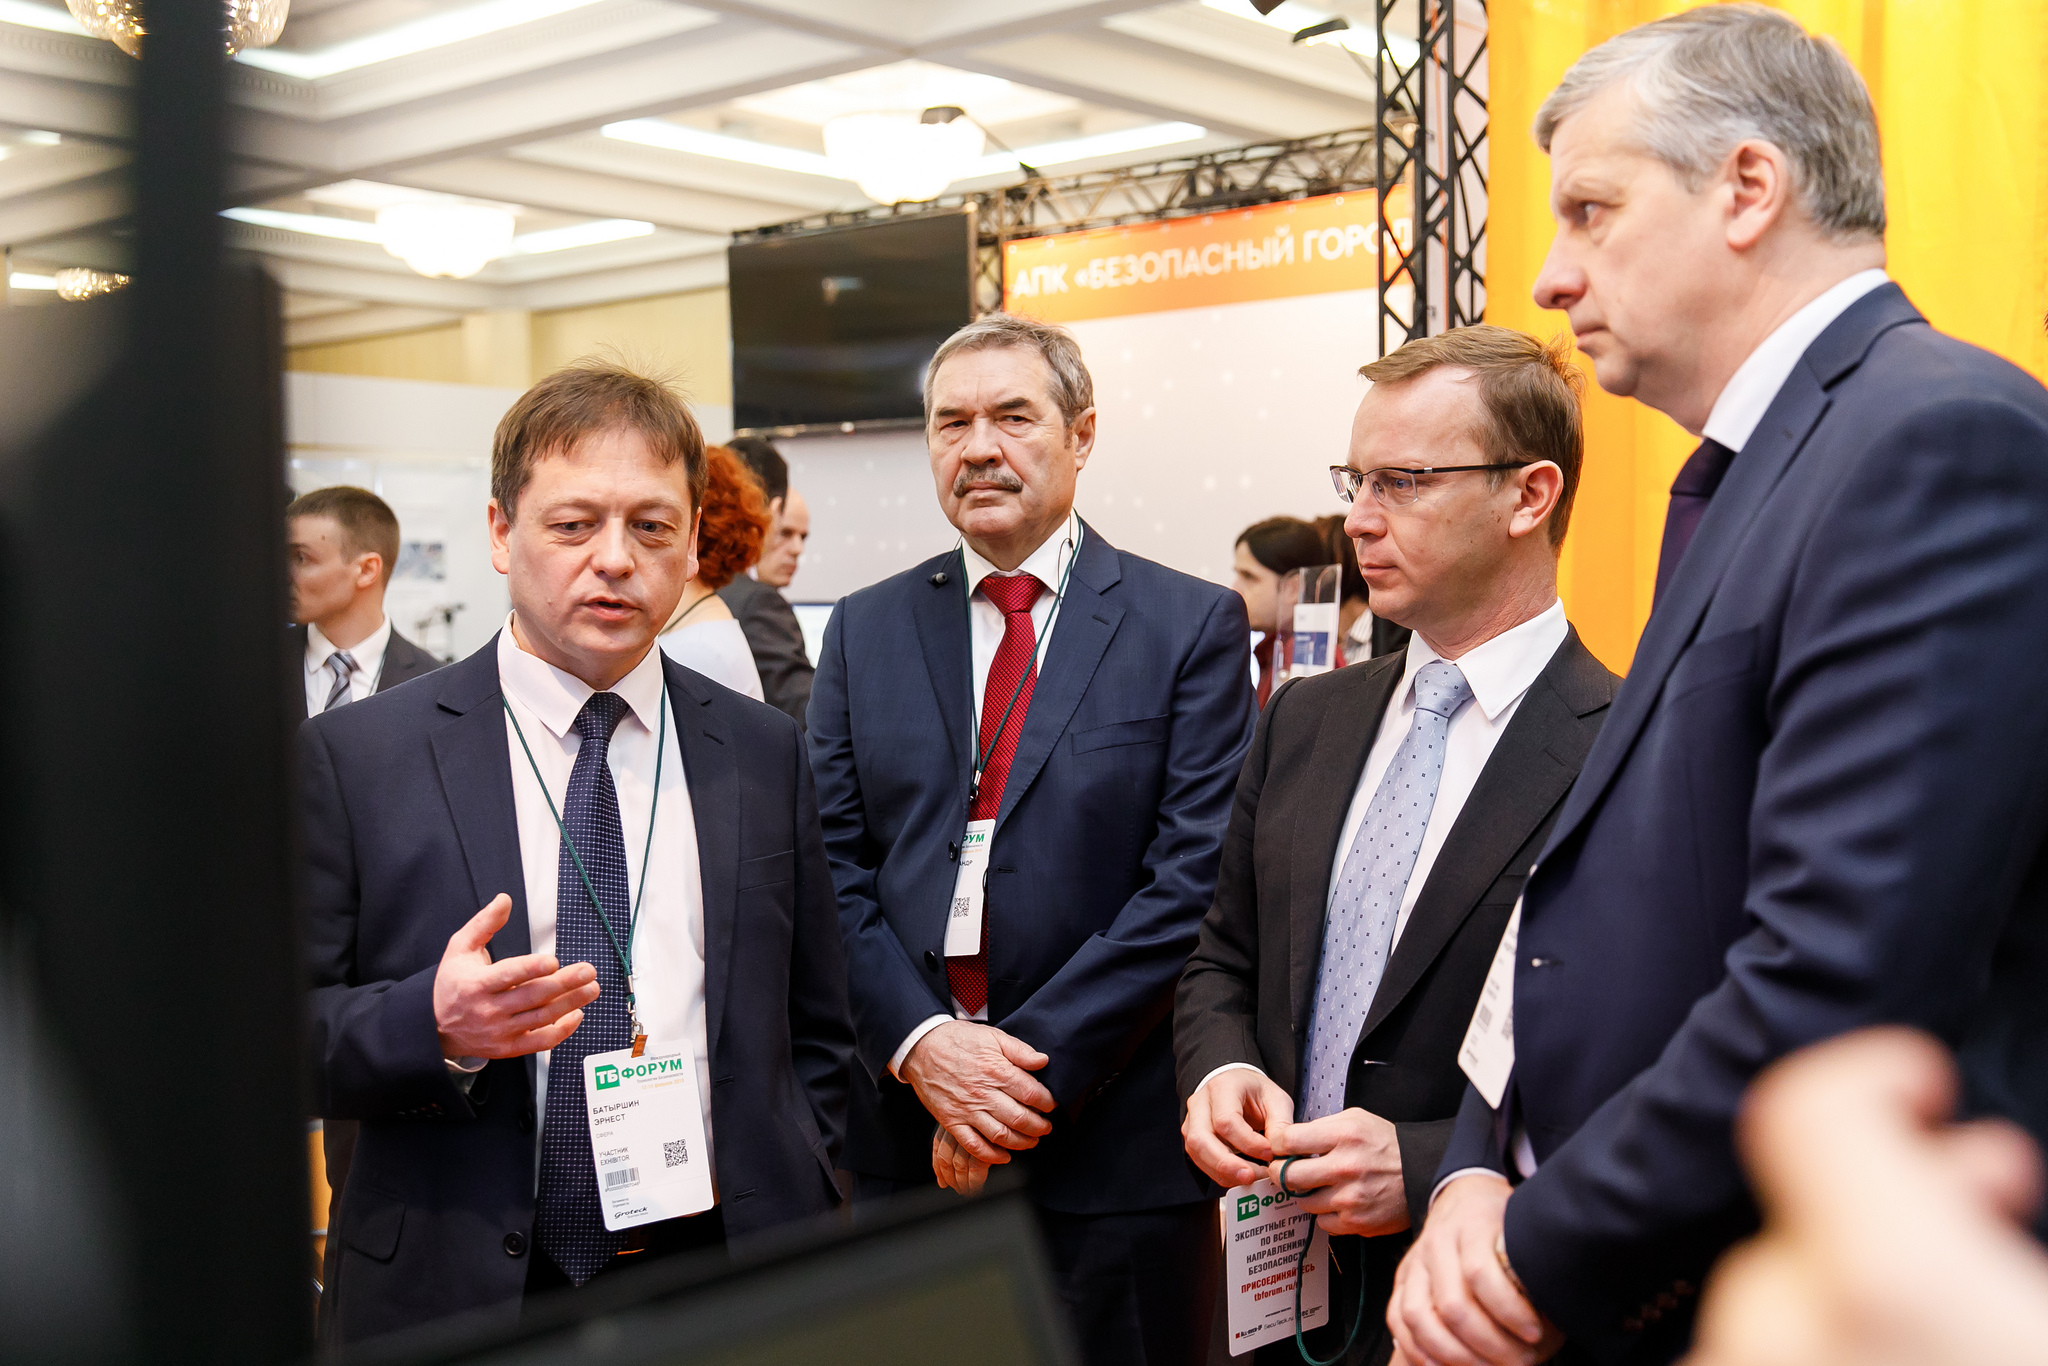 The XXV Anniversary International Forum of Security & Safety Technologies will bring together key participants of the security industry in Russia